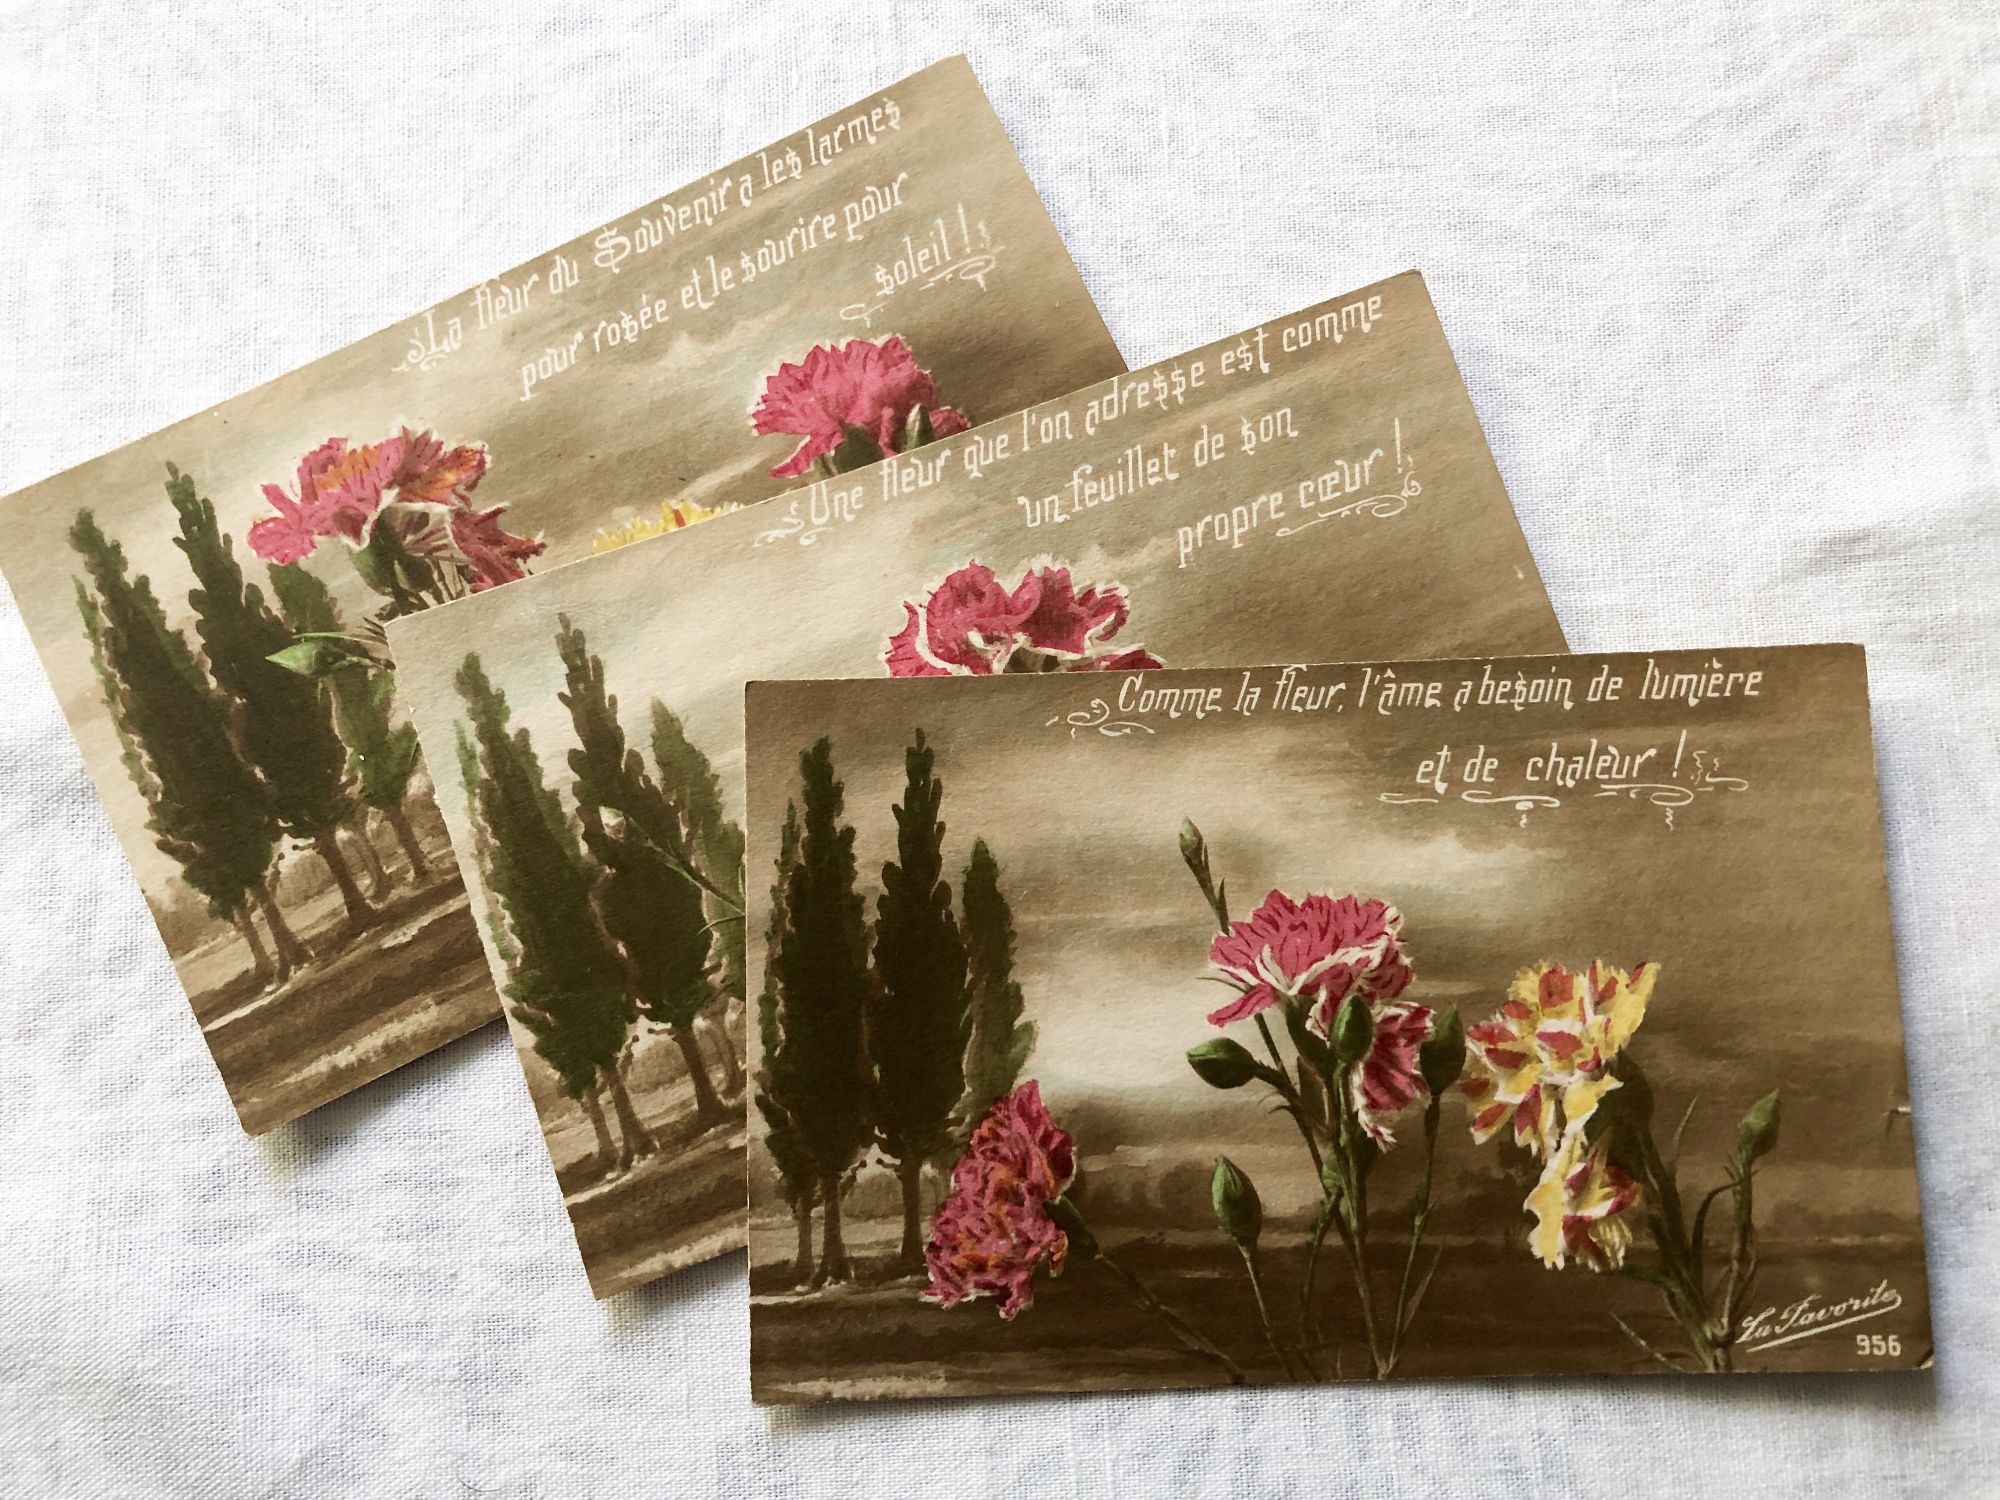 3 French postcards with sentimental thoughts on flowers from 1920s